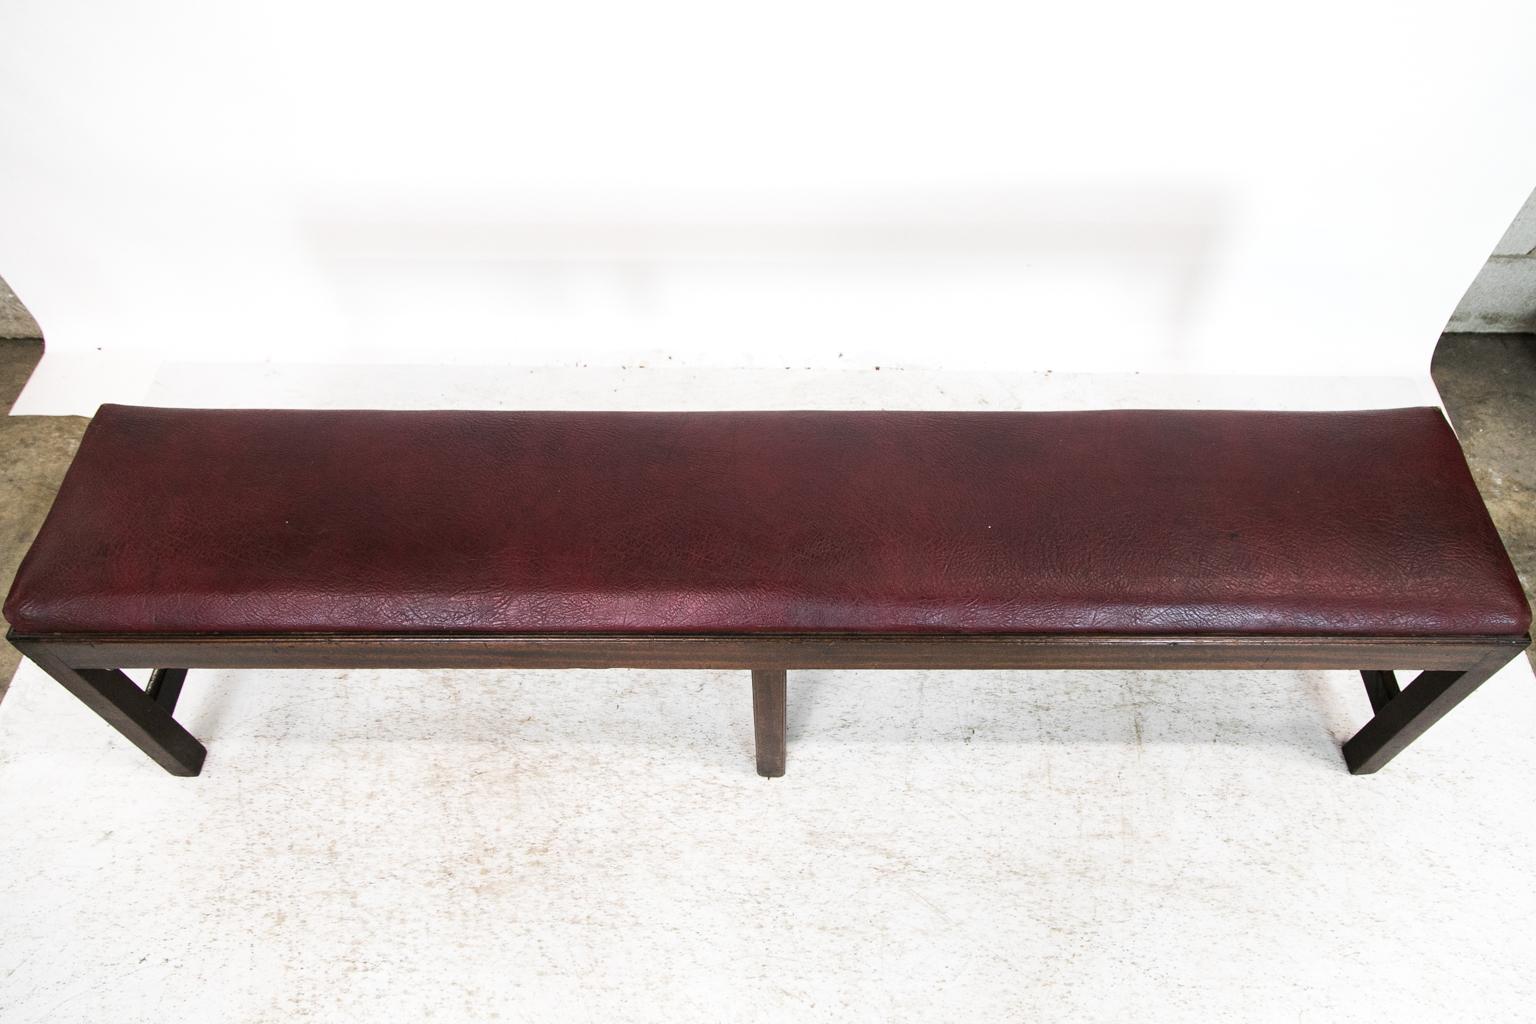 This long bench is made of solid mahogany. The top edge of the main frame and edges of the legs are molded. The heavy cross stretcher connects and supports the legs. The seat lifts out for easy recovering if needed.
  